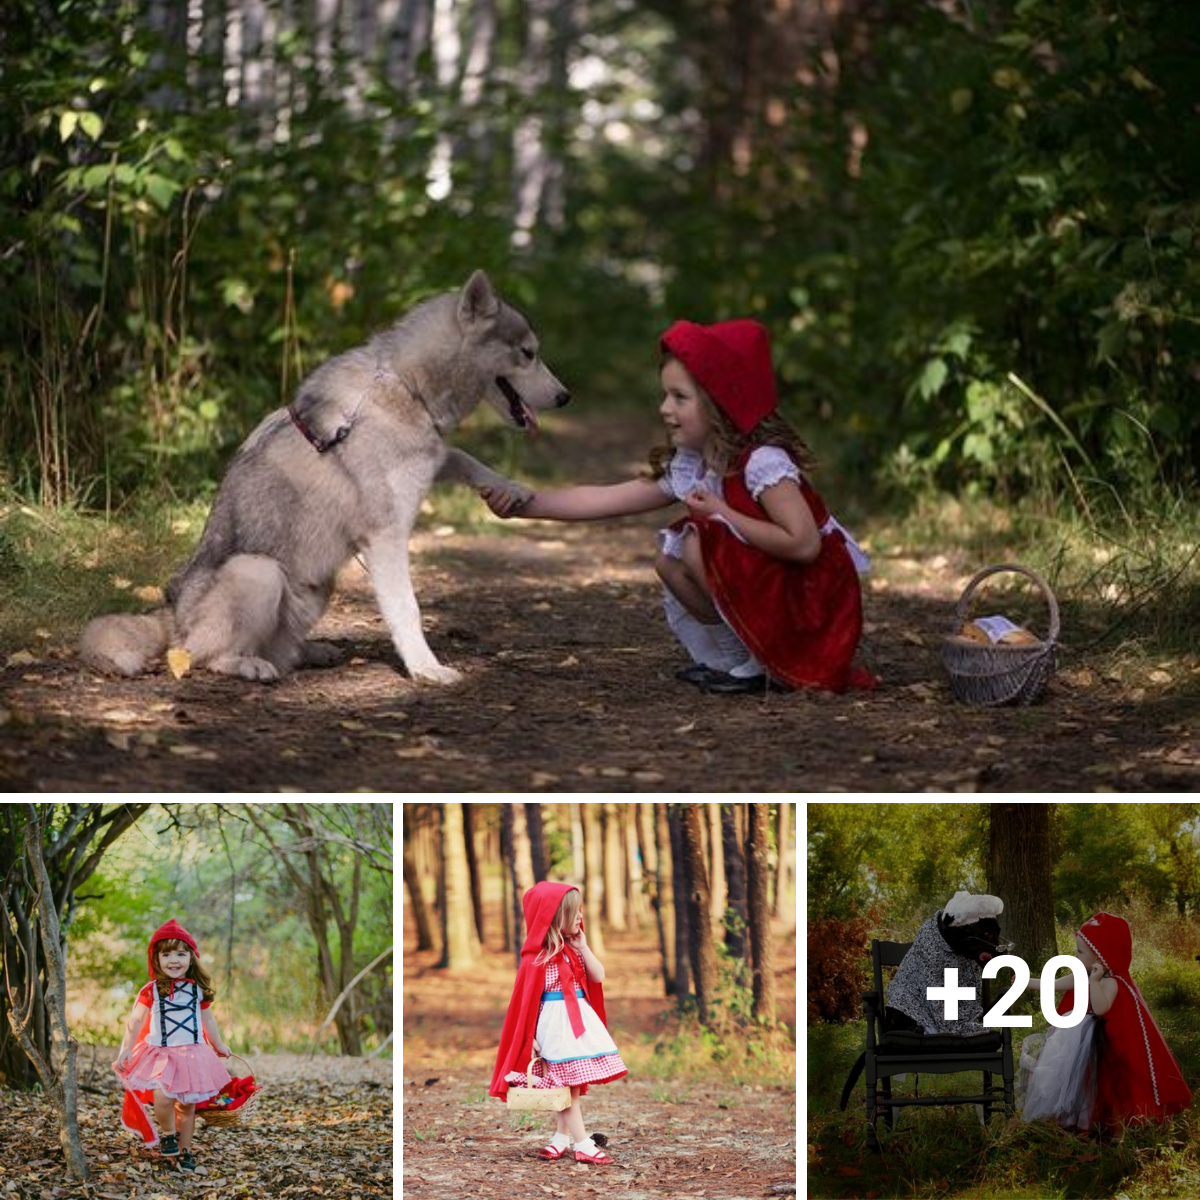 Little Red Riding Hood sets forth on her ages-old adventure, lost in the enchanted woods and navigating its secrets with bravery and innocence.